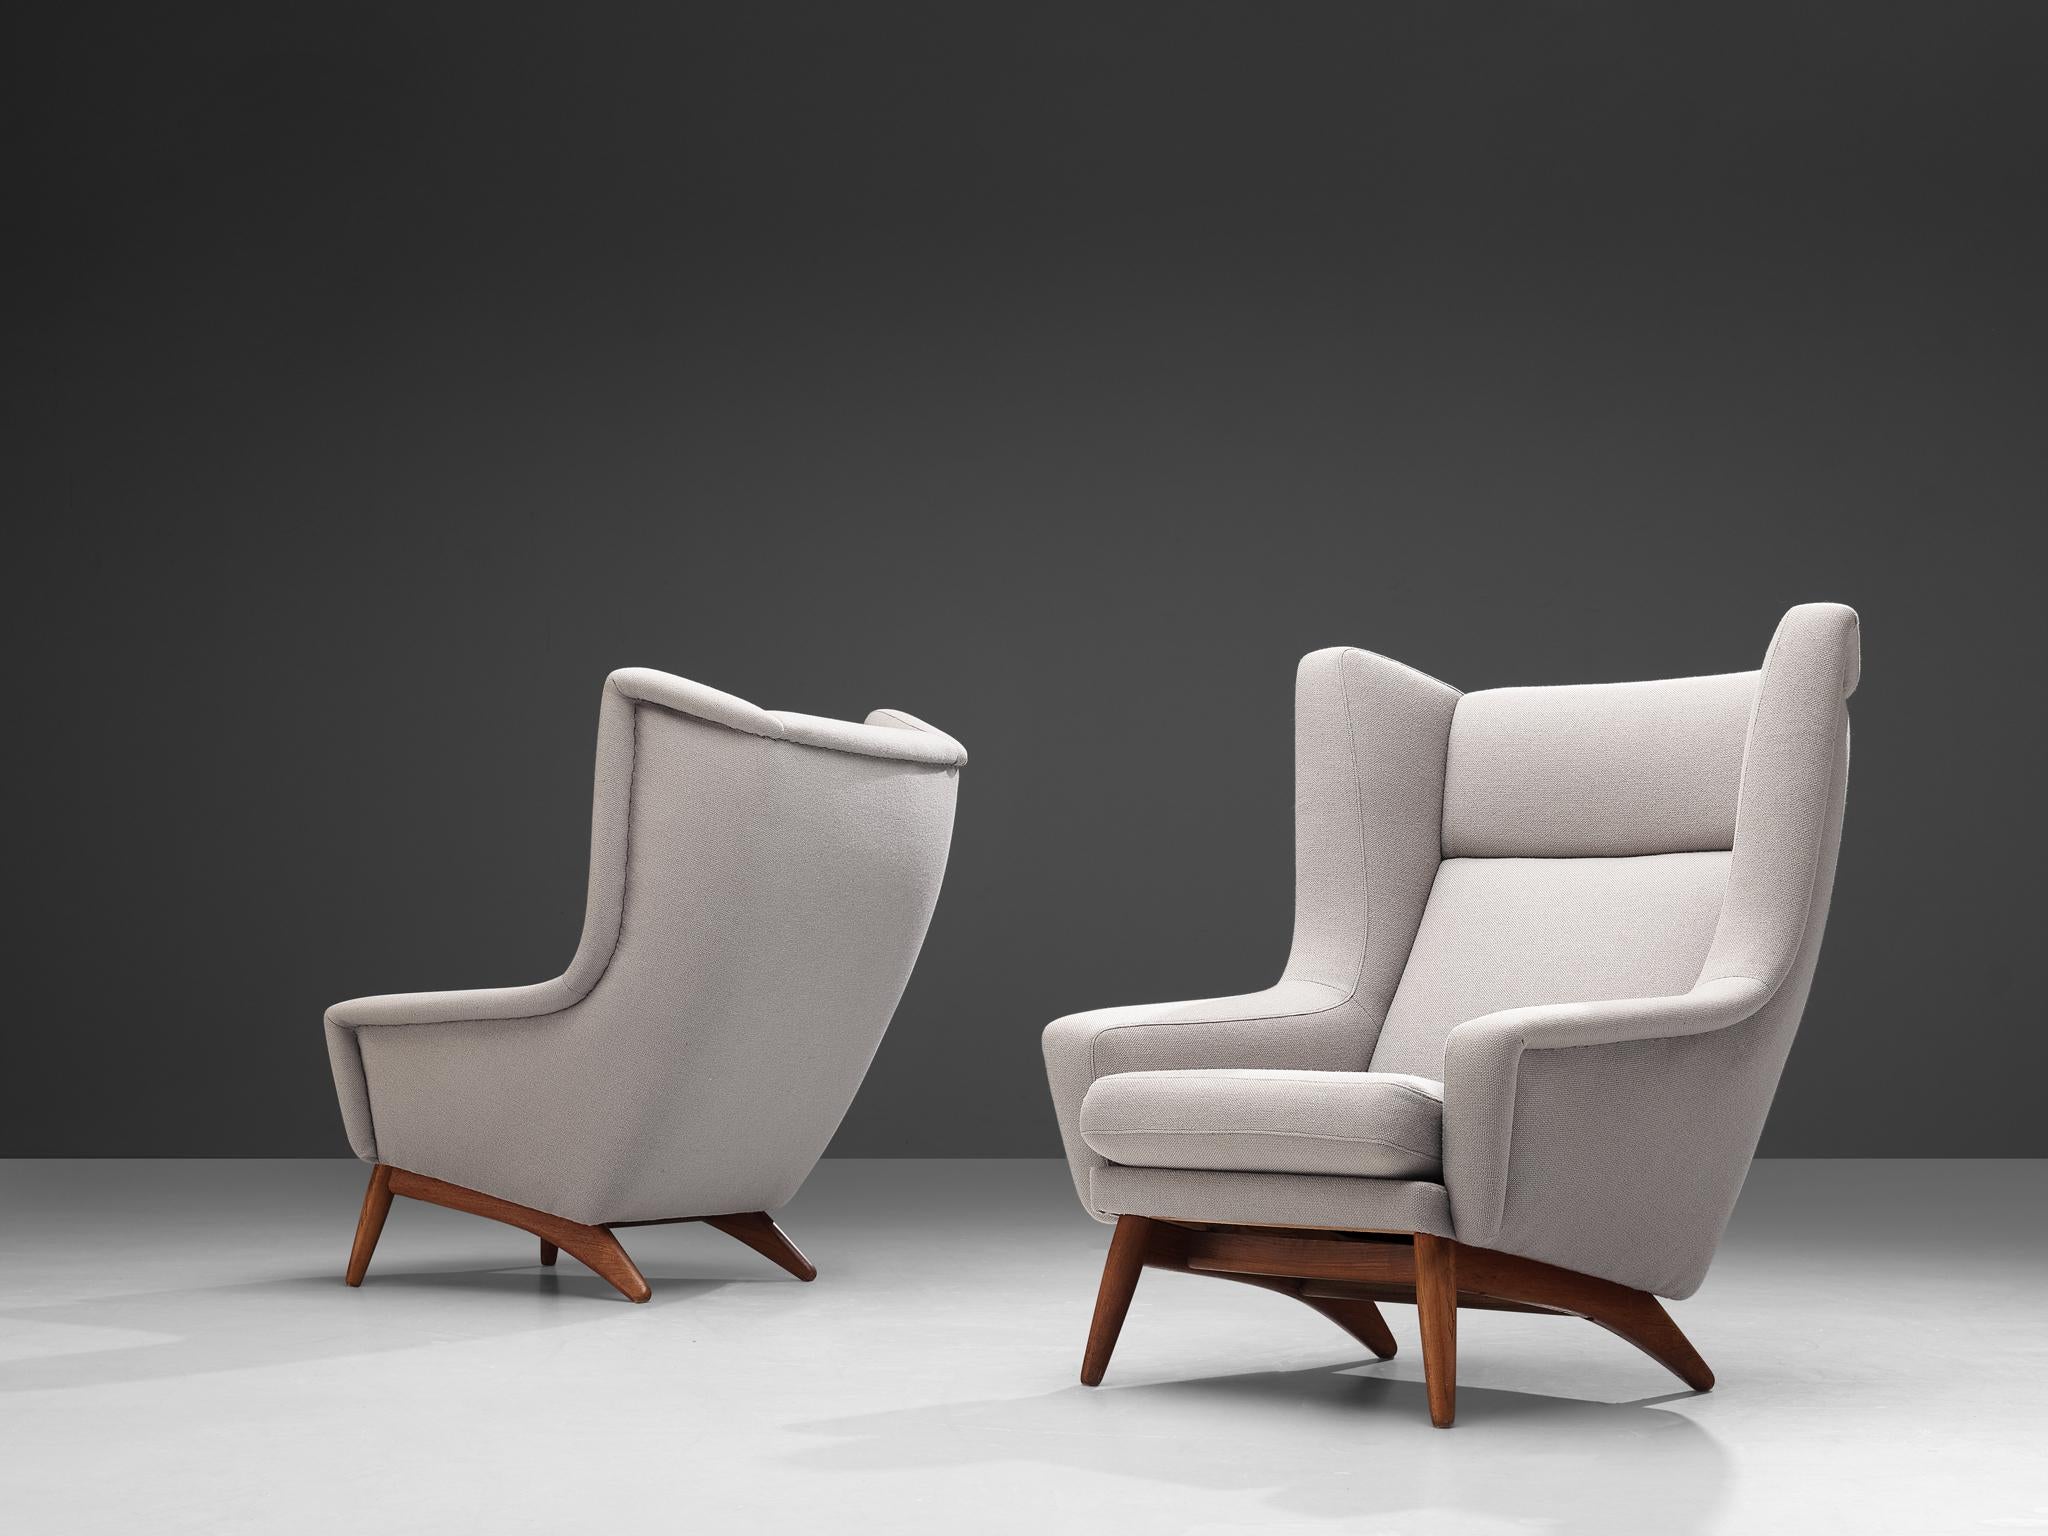 Pair of lounge chairs, teak, off-white upholstery, Denmark, 1950s

This Scandinavian Modern lounge chair is characterized by a stylish timeless design based on elegant shapes and clean lines. The slightly wing-shaped ears bring a more open and